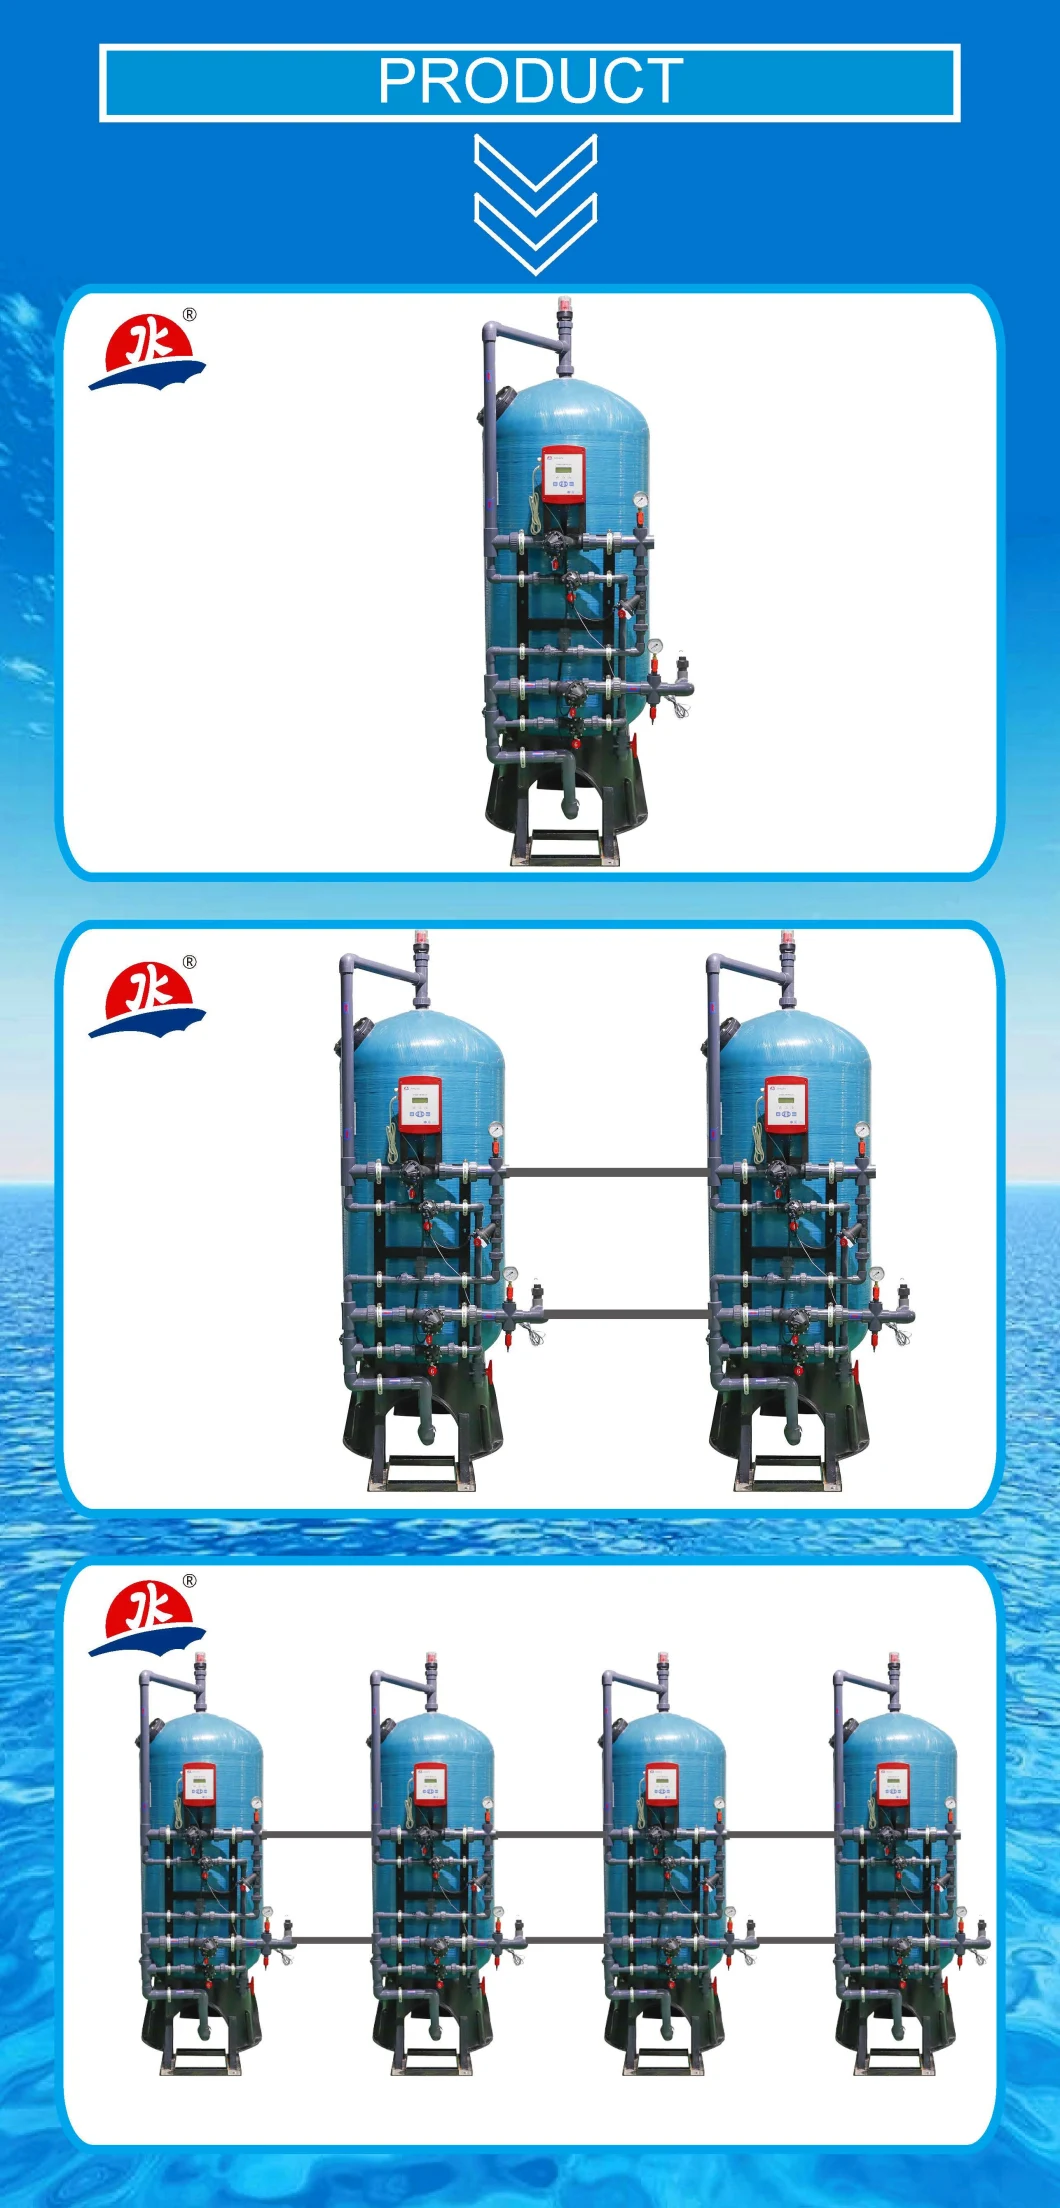 Jkmatic Resin Exchange Water Softener Treatment Equipment with Multi Valves